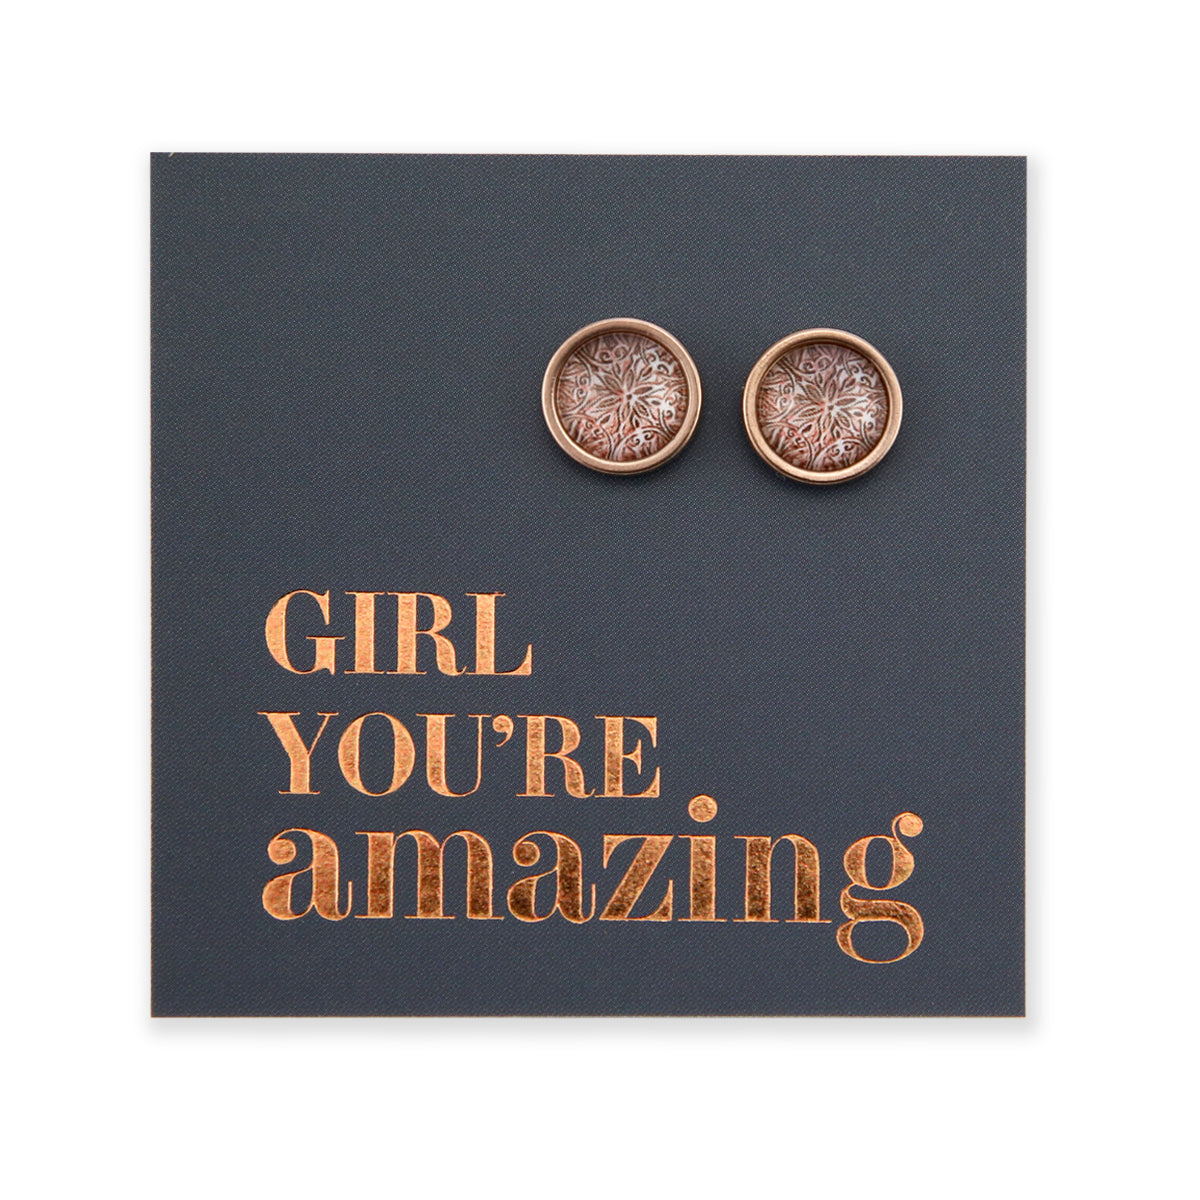 Beautiful rose gold printed stainless steel circle stud hypoallergenic earrings on girl you are amazing gift cards. 